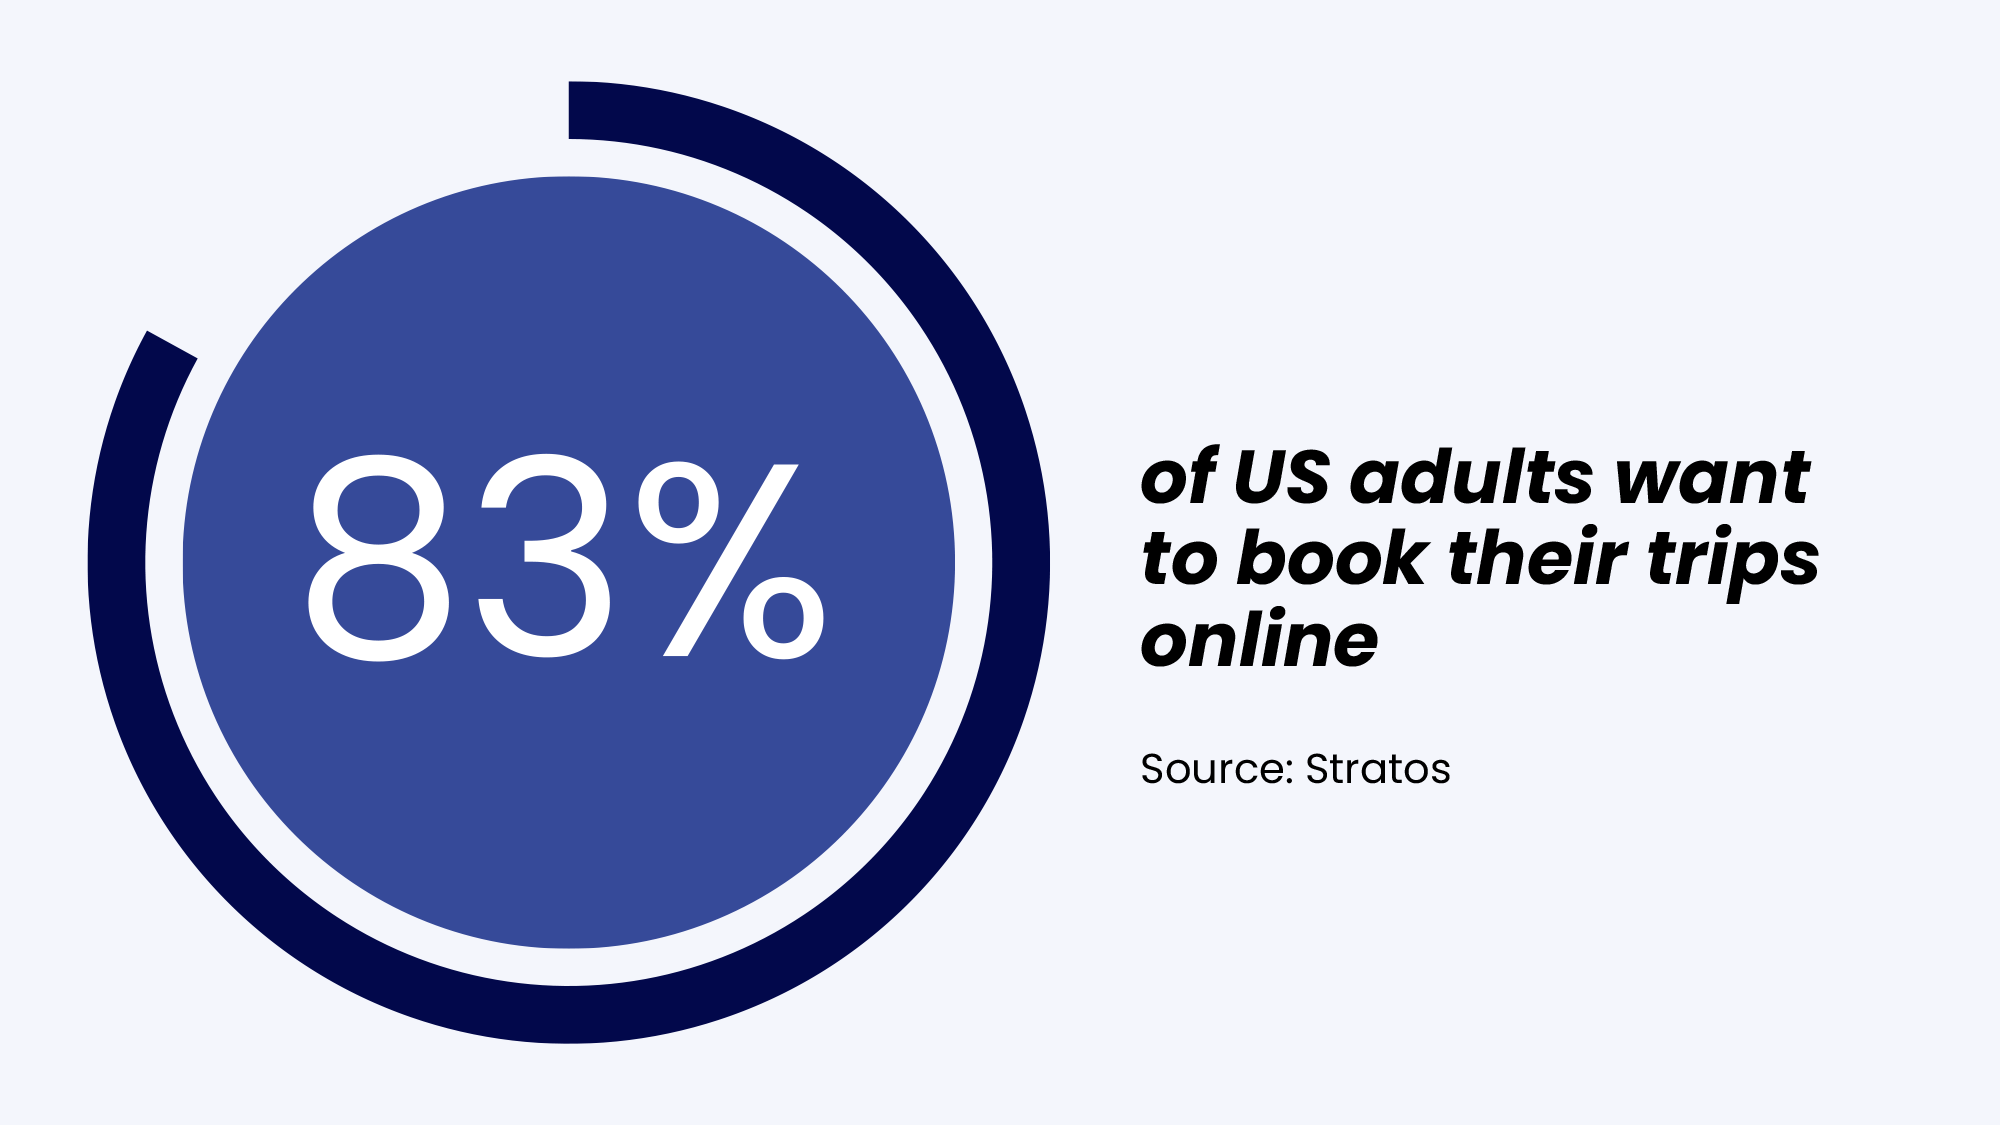 of US adults want to book their trips online